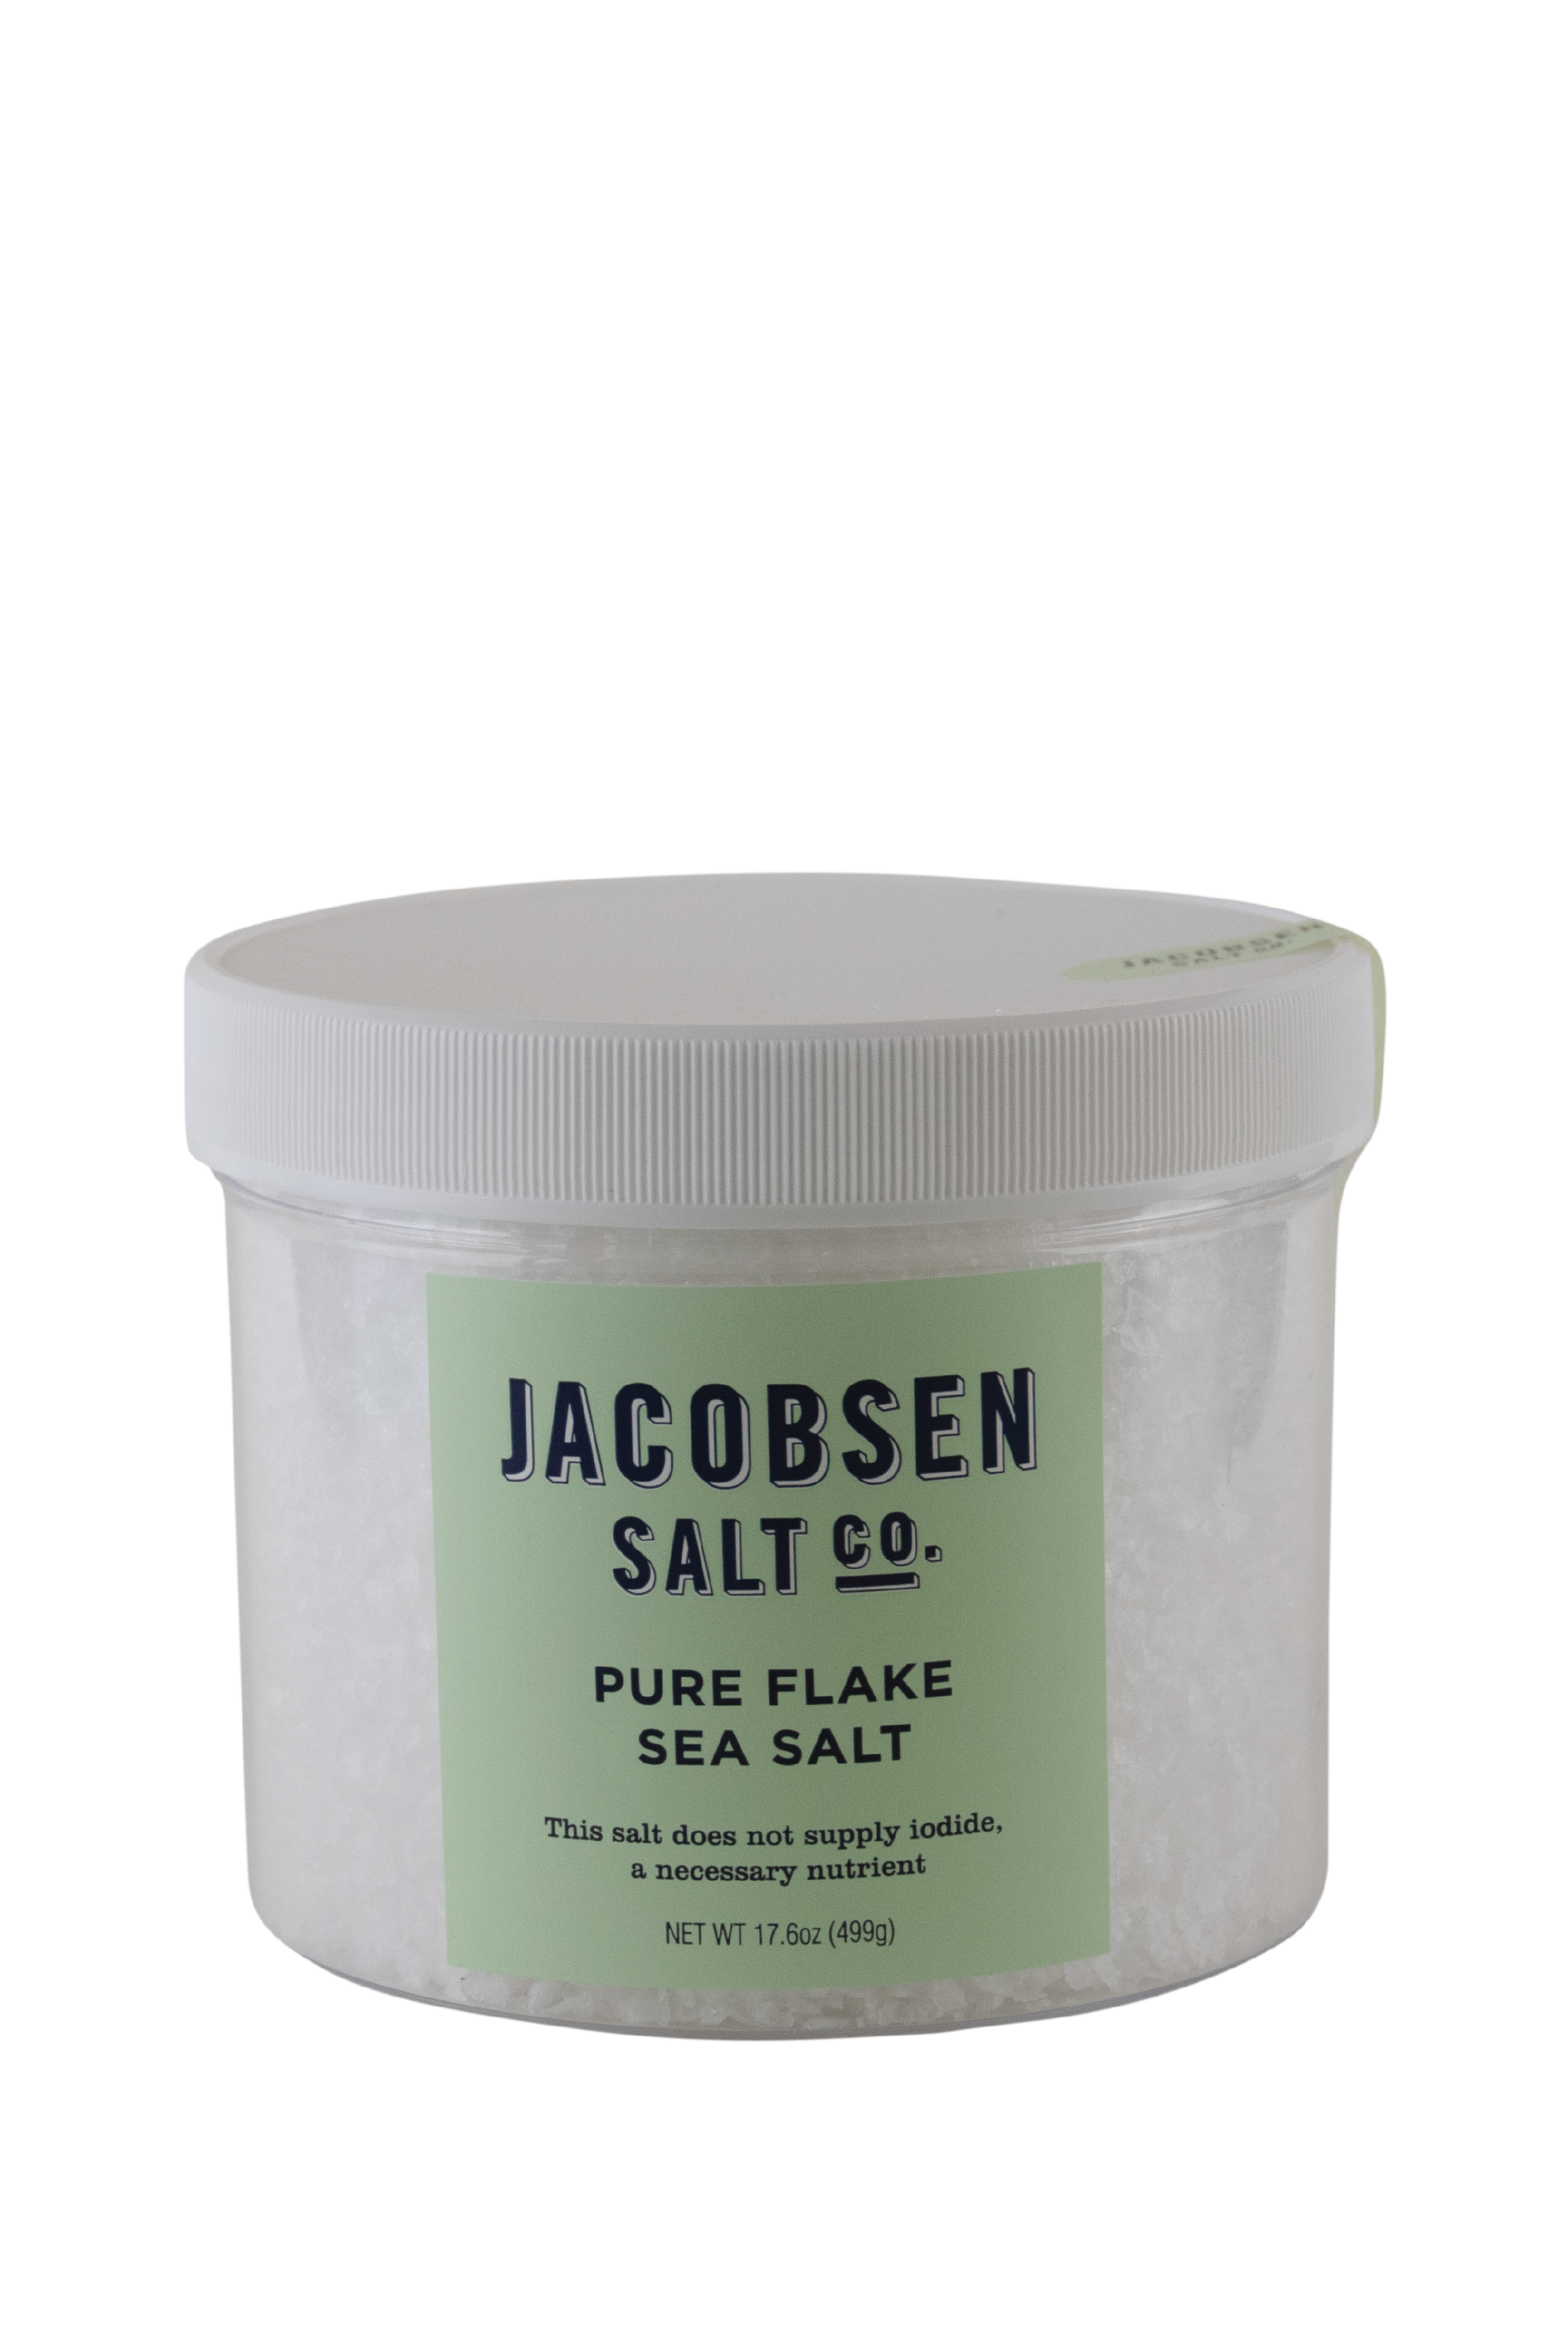 A Large Plastic Jar Of Jacobsen Salt Co's Pure Flake Sea Salt With Celeste Green Label and White Background. Label says "This salt does not supply iodide, a necessary nutrient."